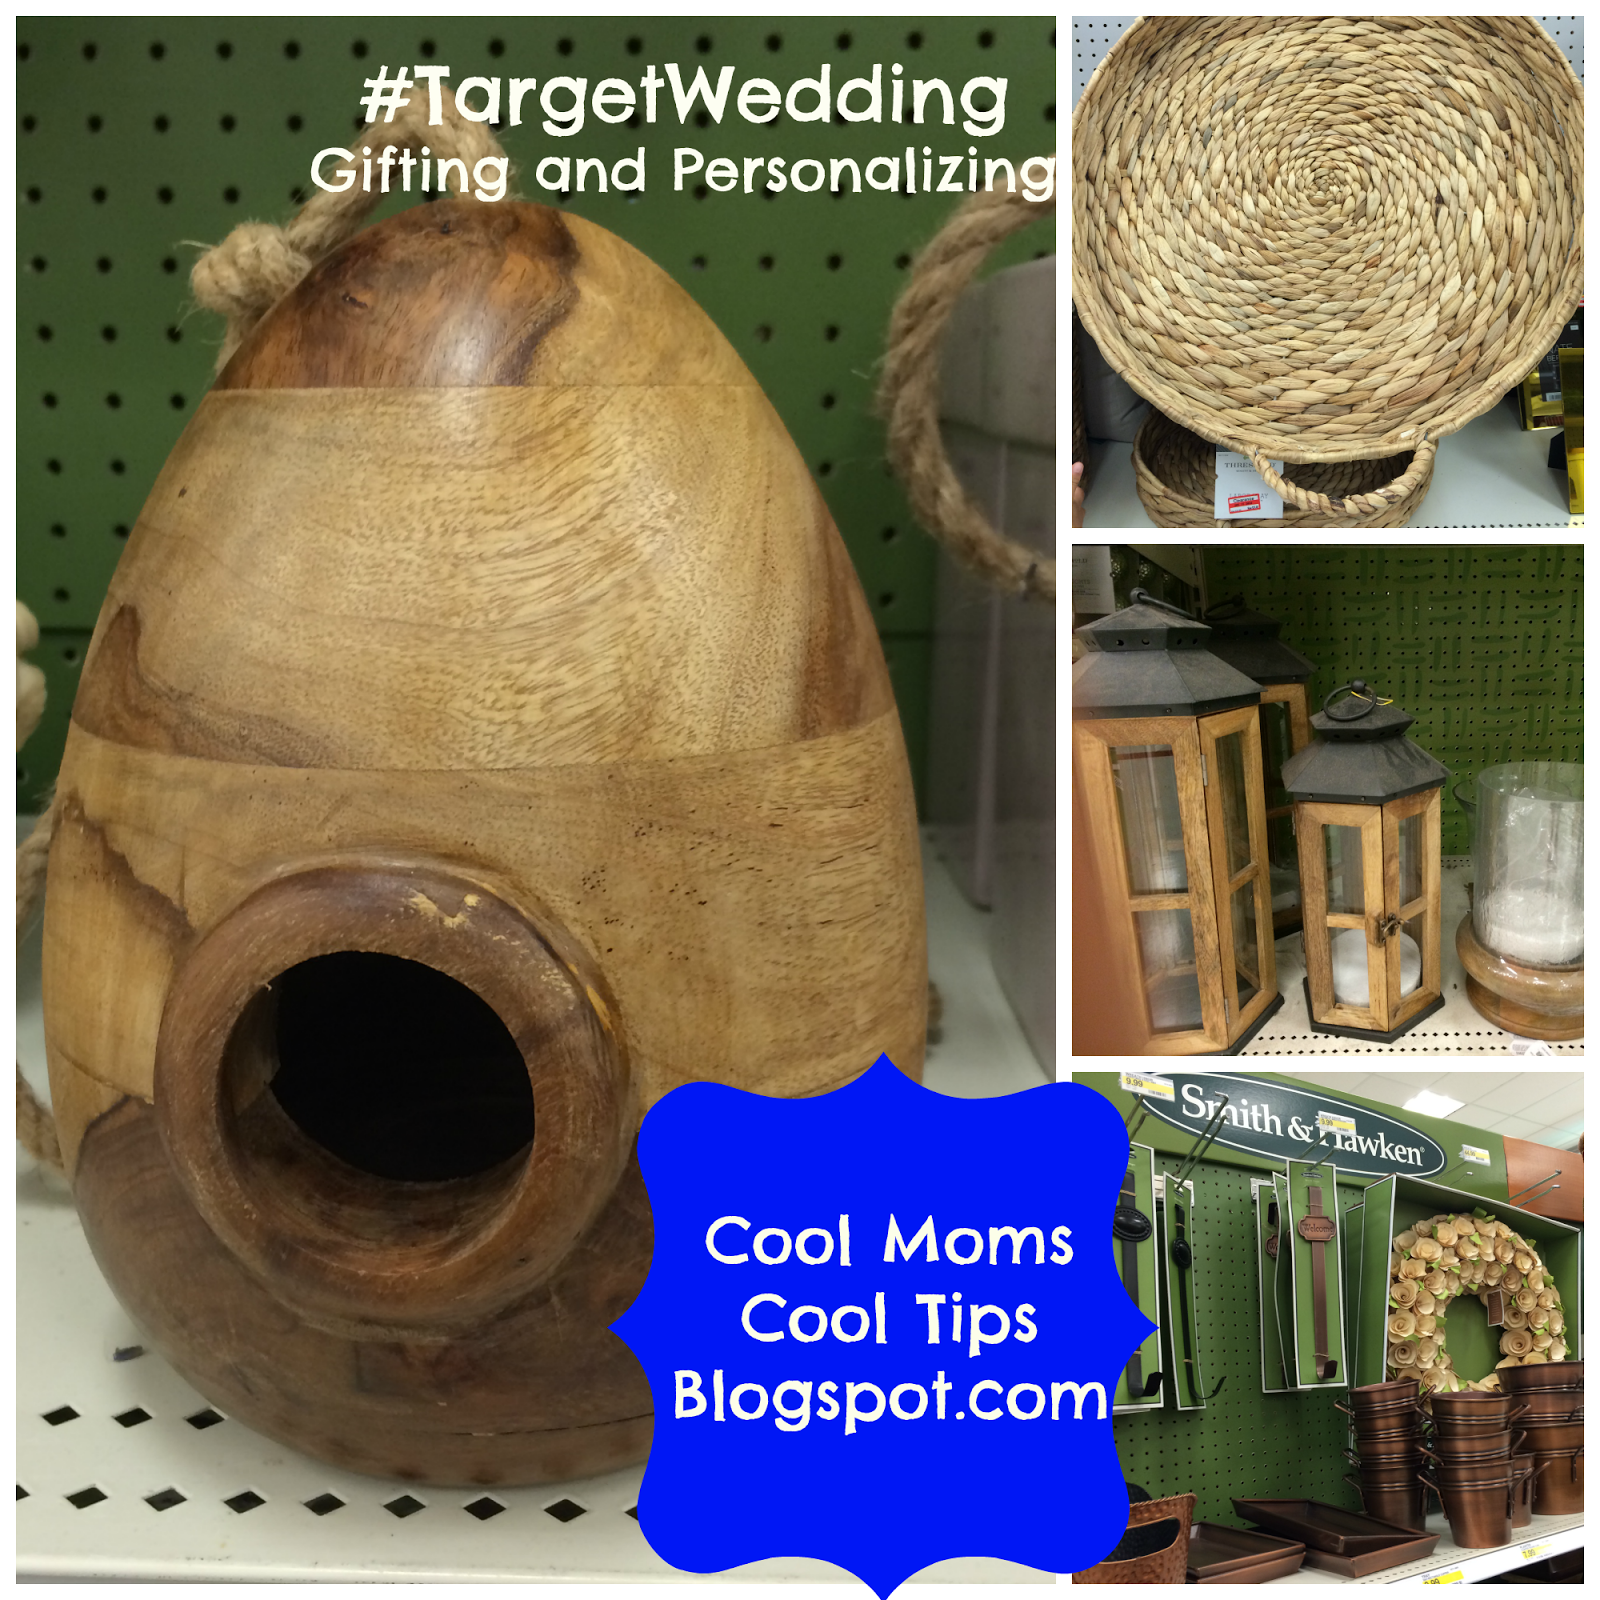 cool moms cool tips #TargetWedding gifting ideas